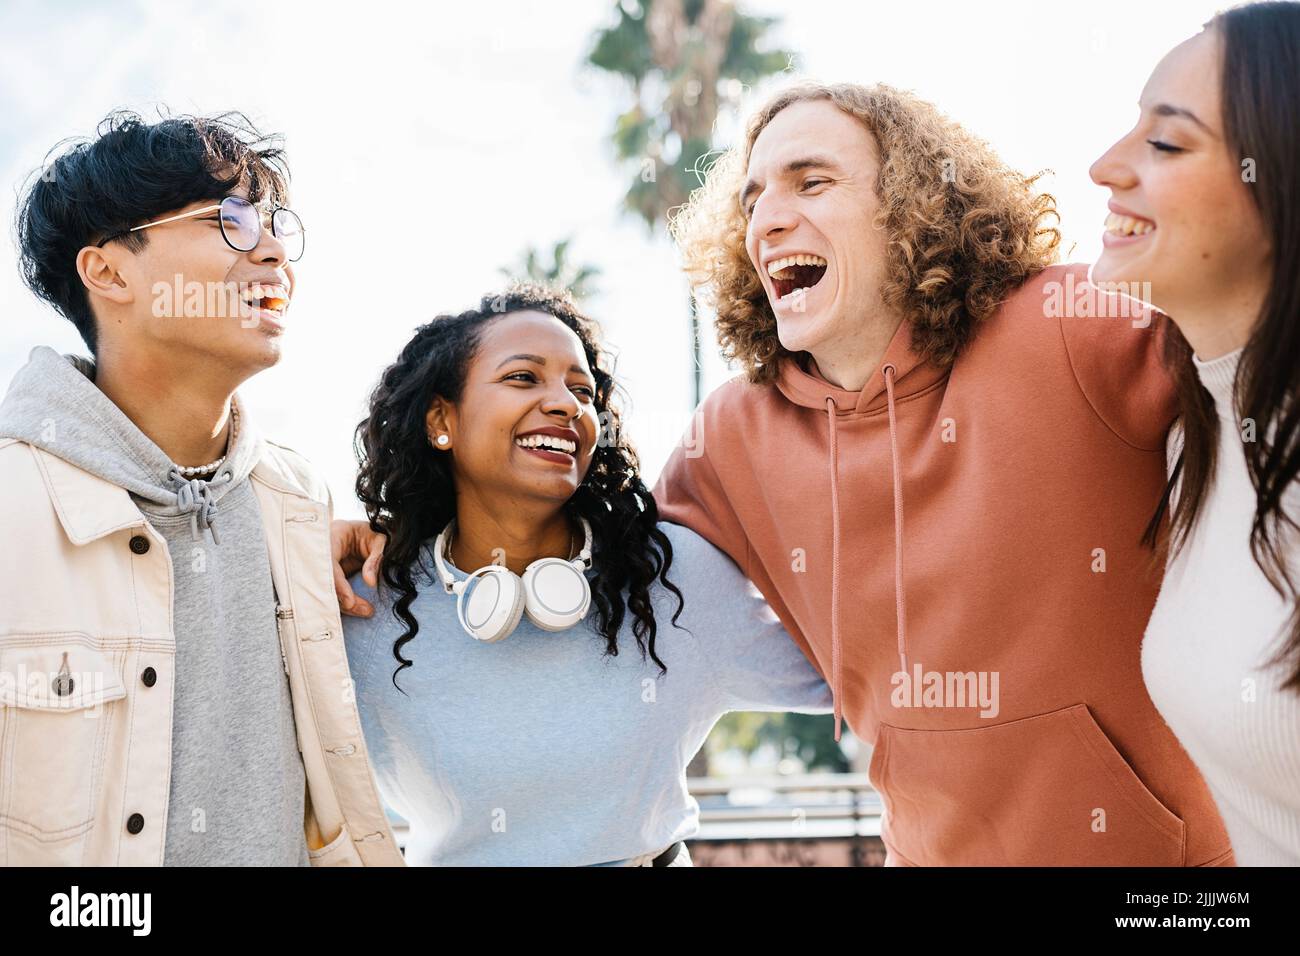 Happy group of multiracial young friends having fun embracing each other Stock Photo